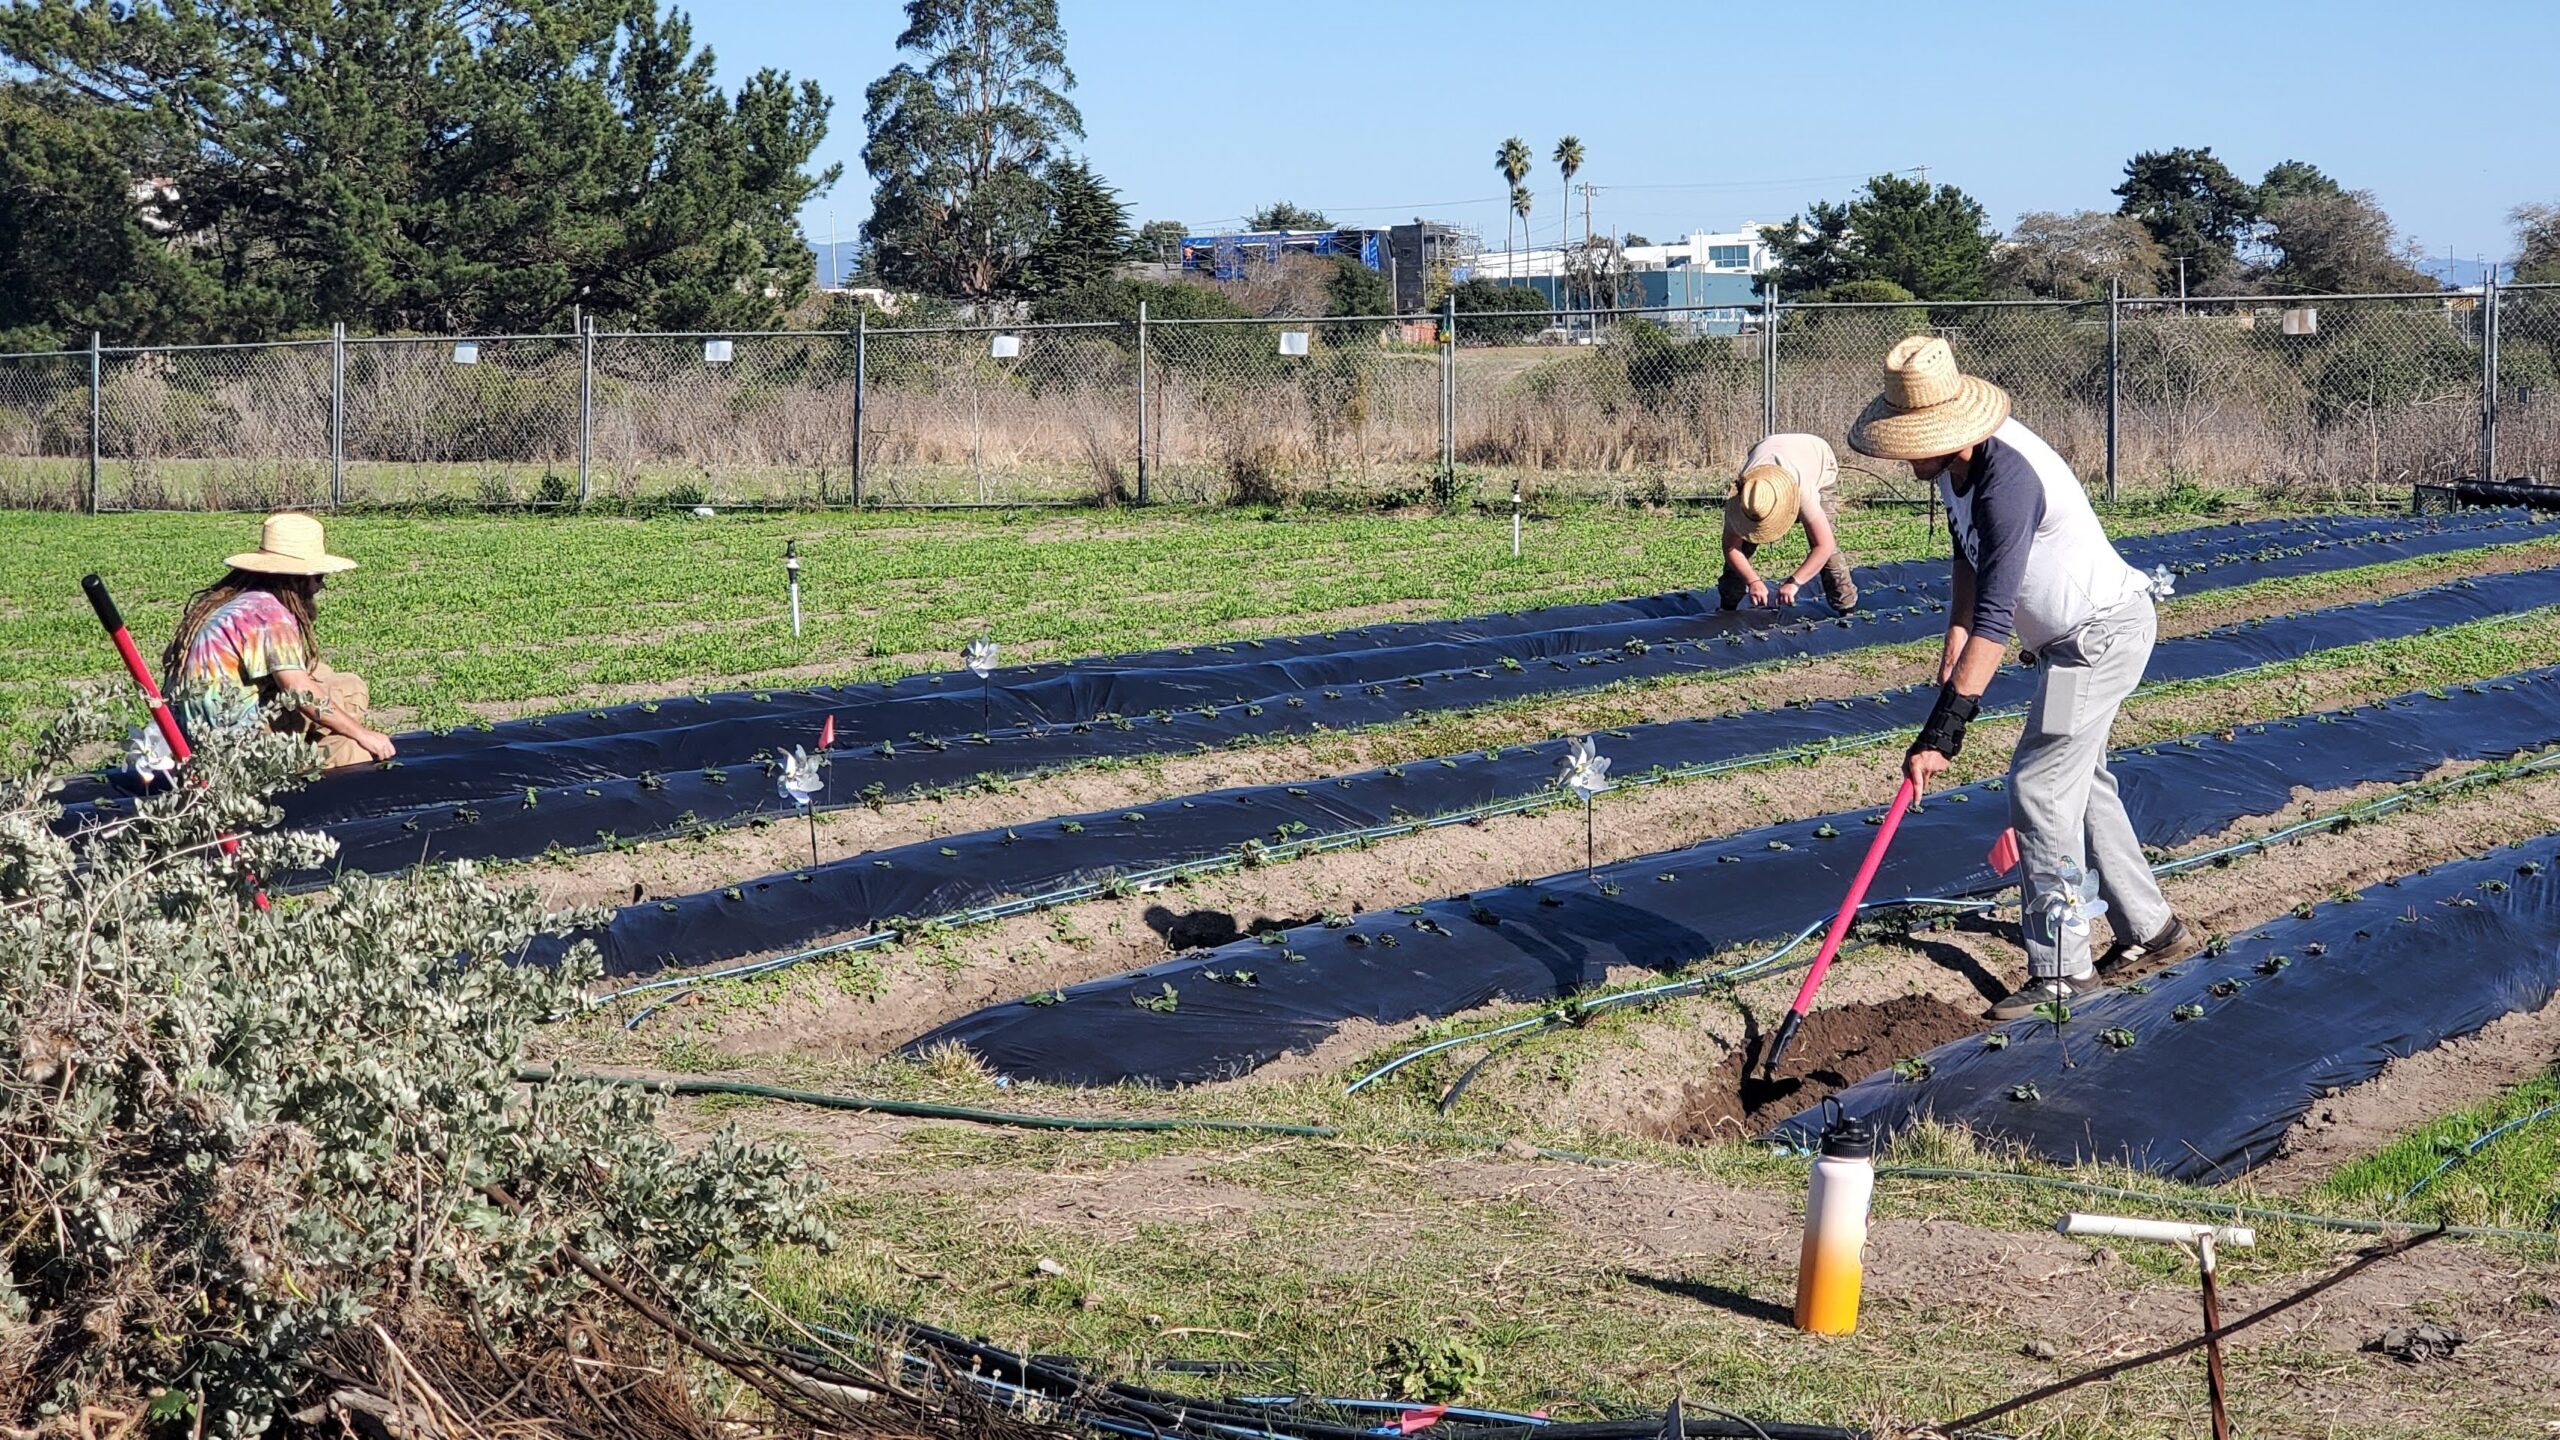 People farming at the Homeless Garden Project in Santa Cruz.